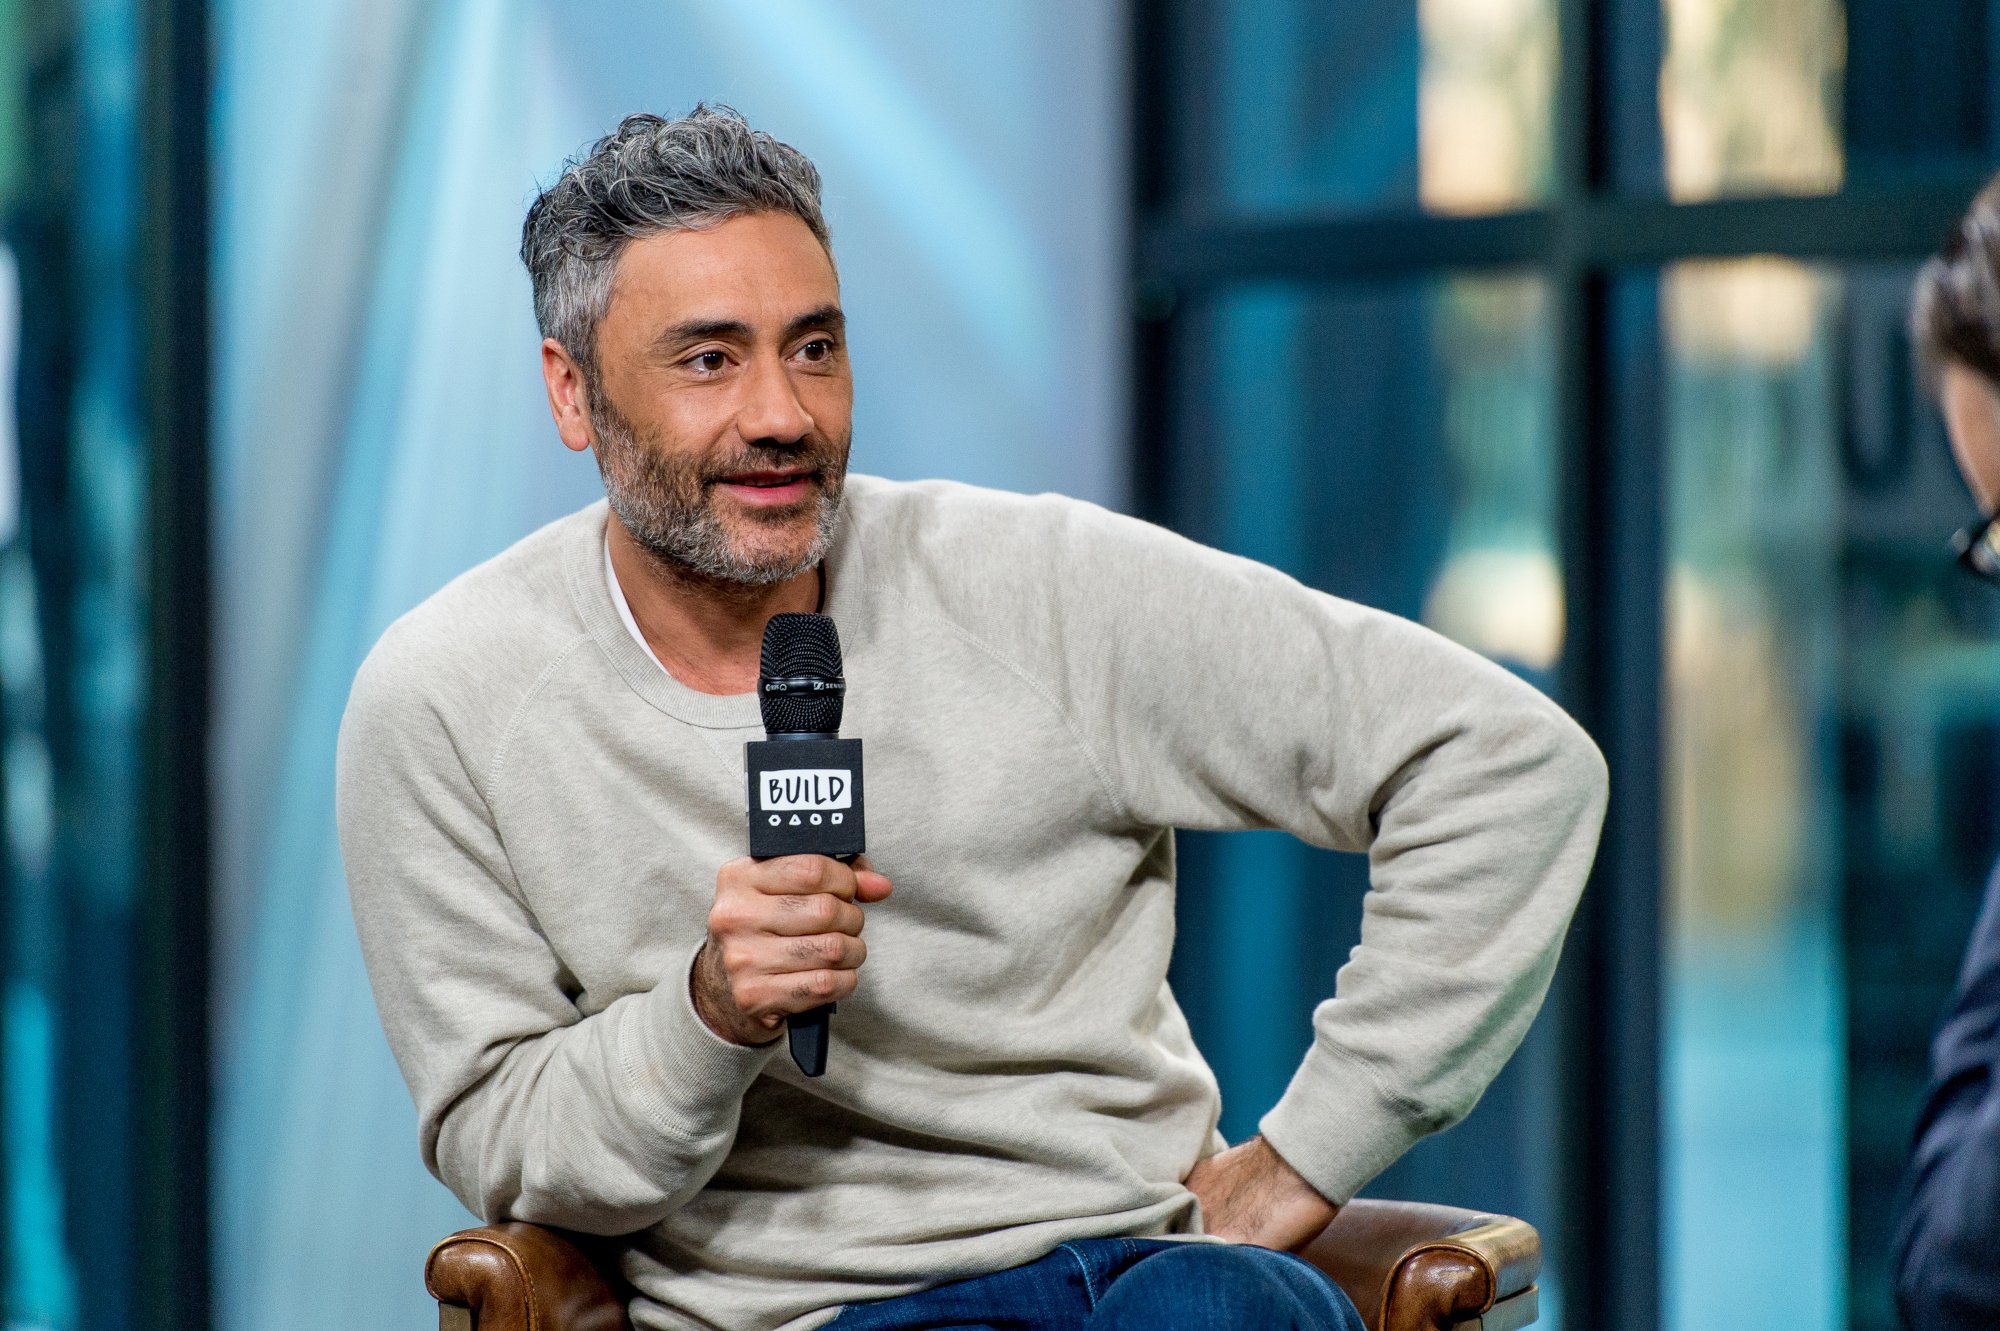 Taika Waititi, the director who decided to bring Jane Foster back for 'Thor: Love and Thunder.' He's sitting down and holding a microphone, and he looks like he's about to say something.